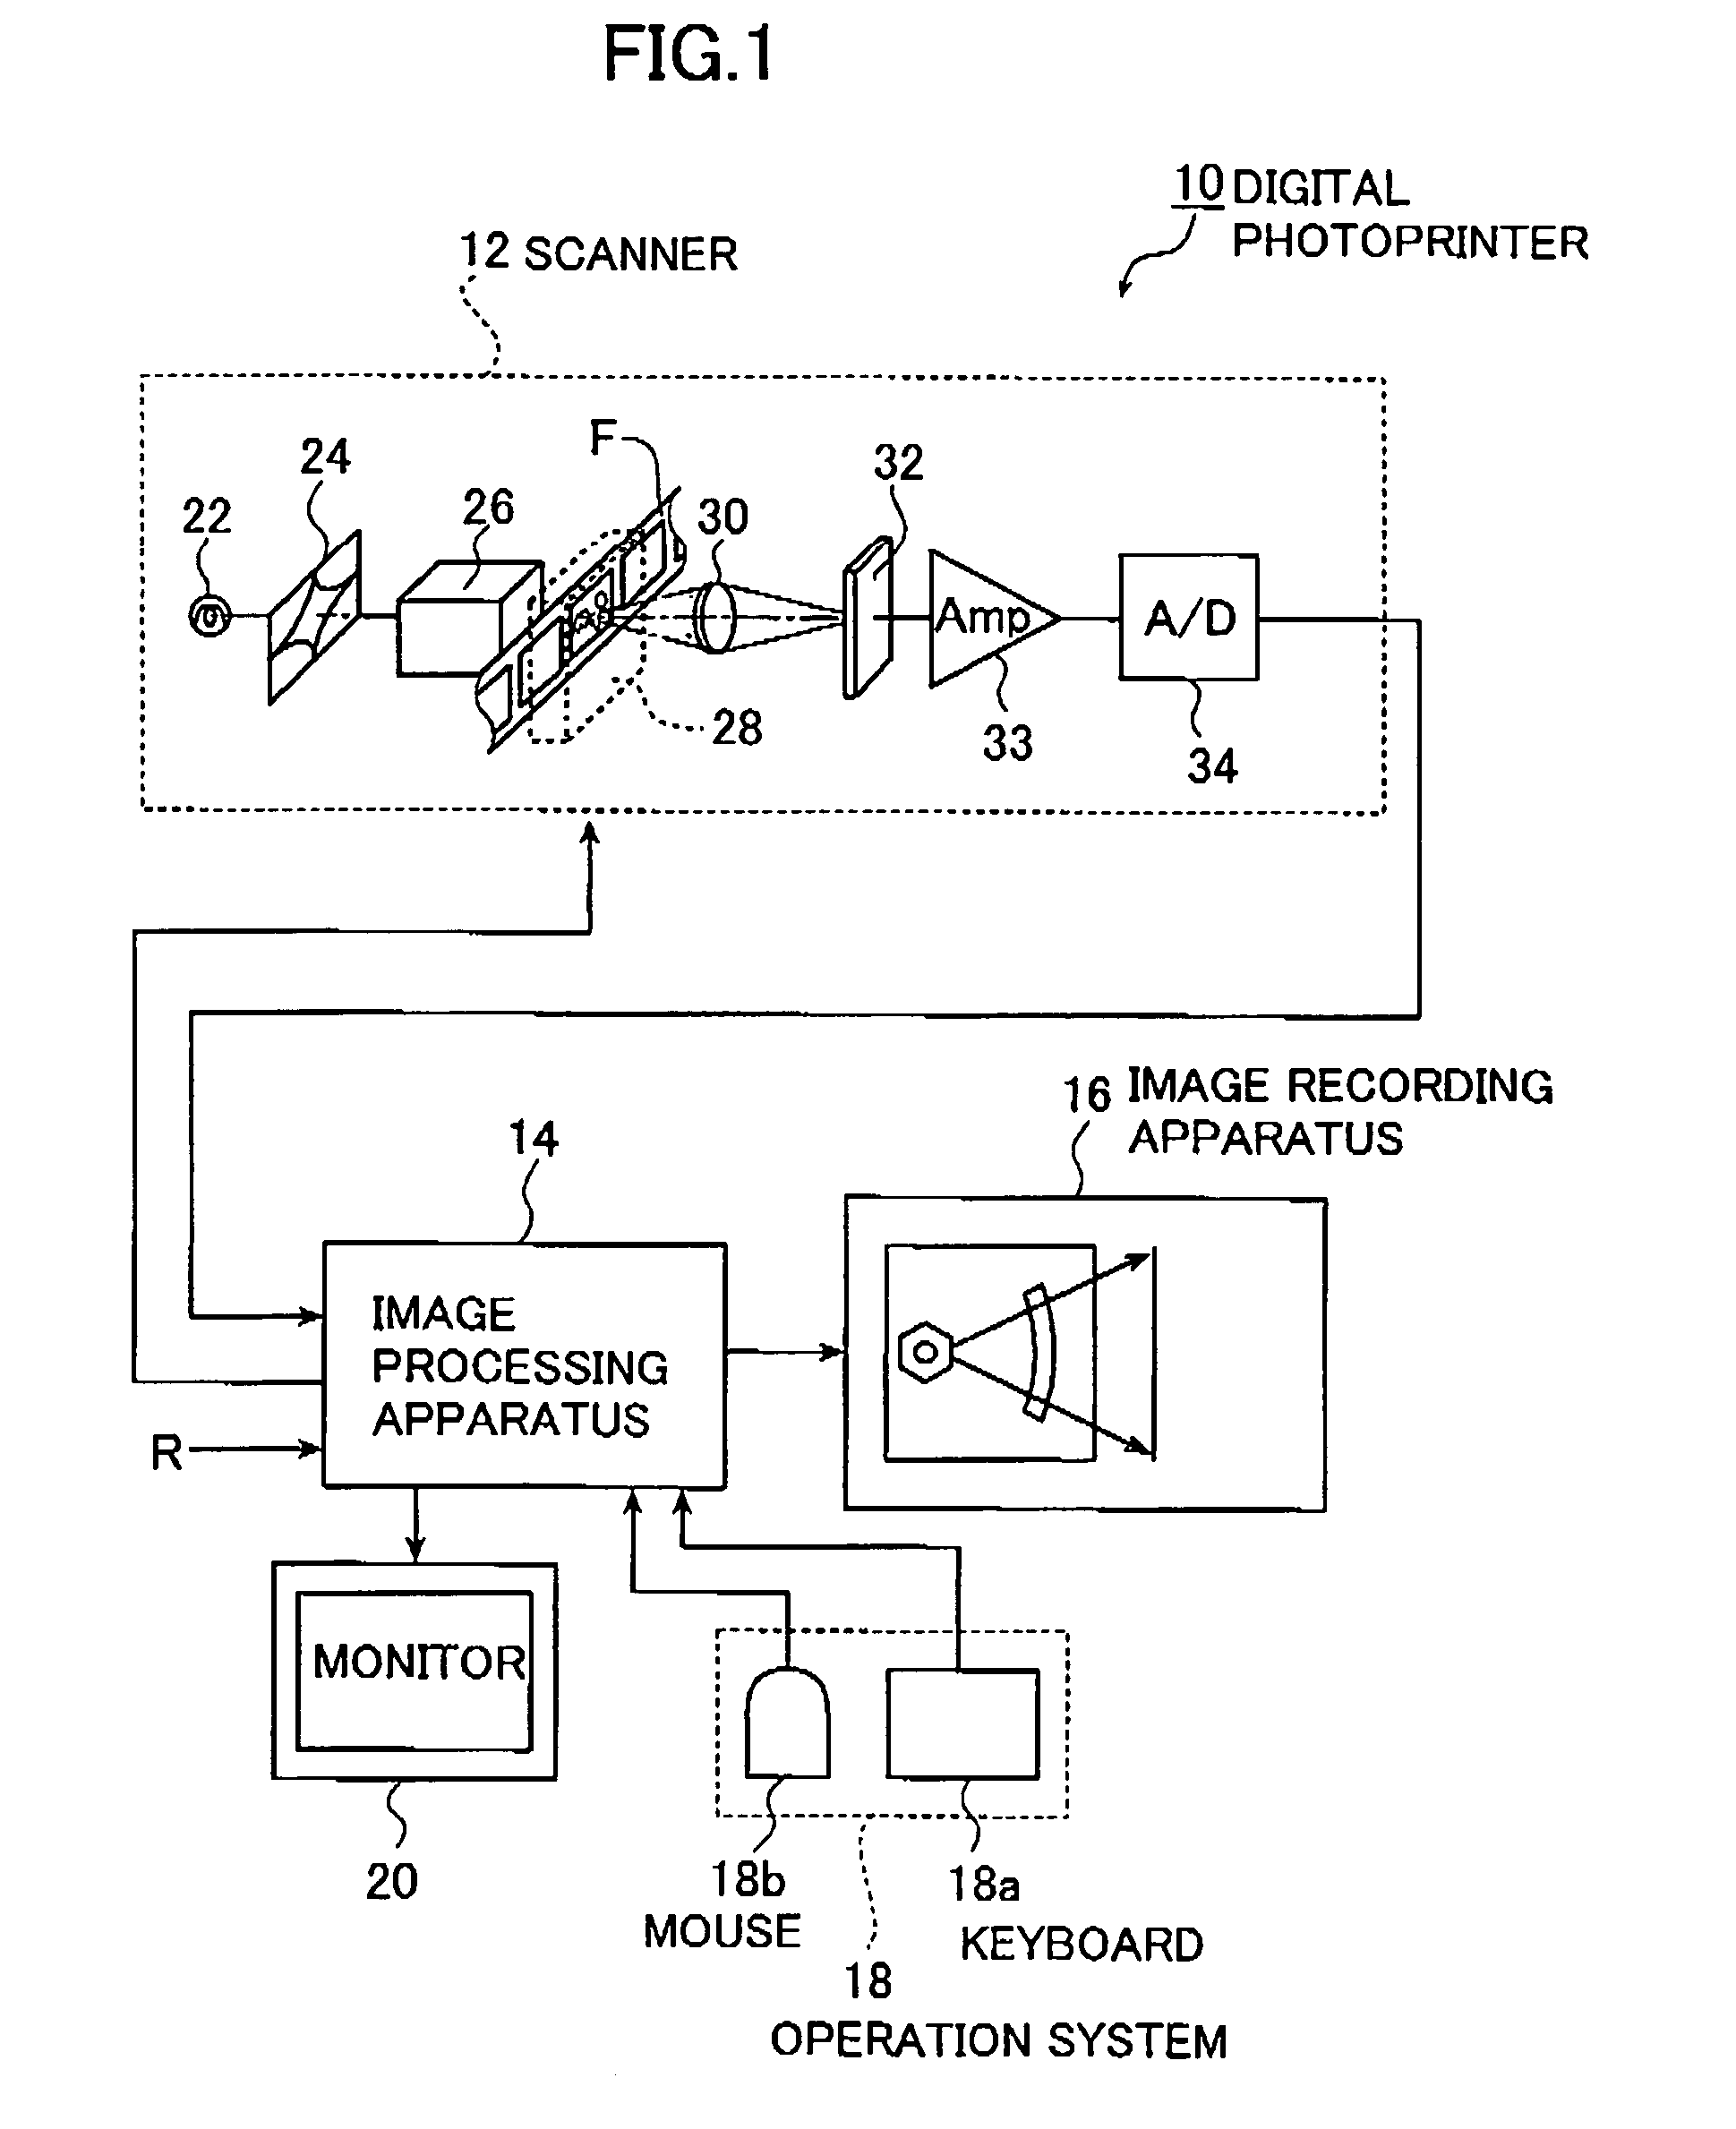 Image processing method using conditions corresponding to an identified person